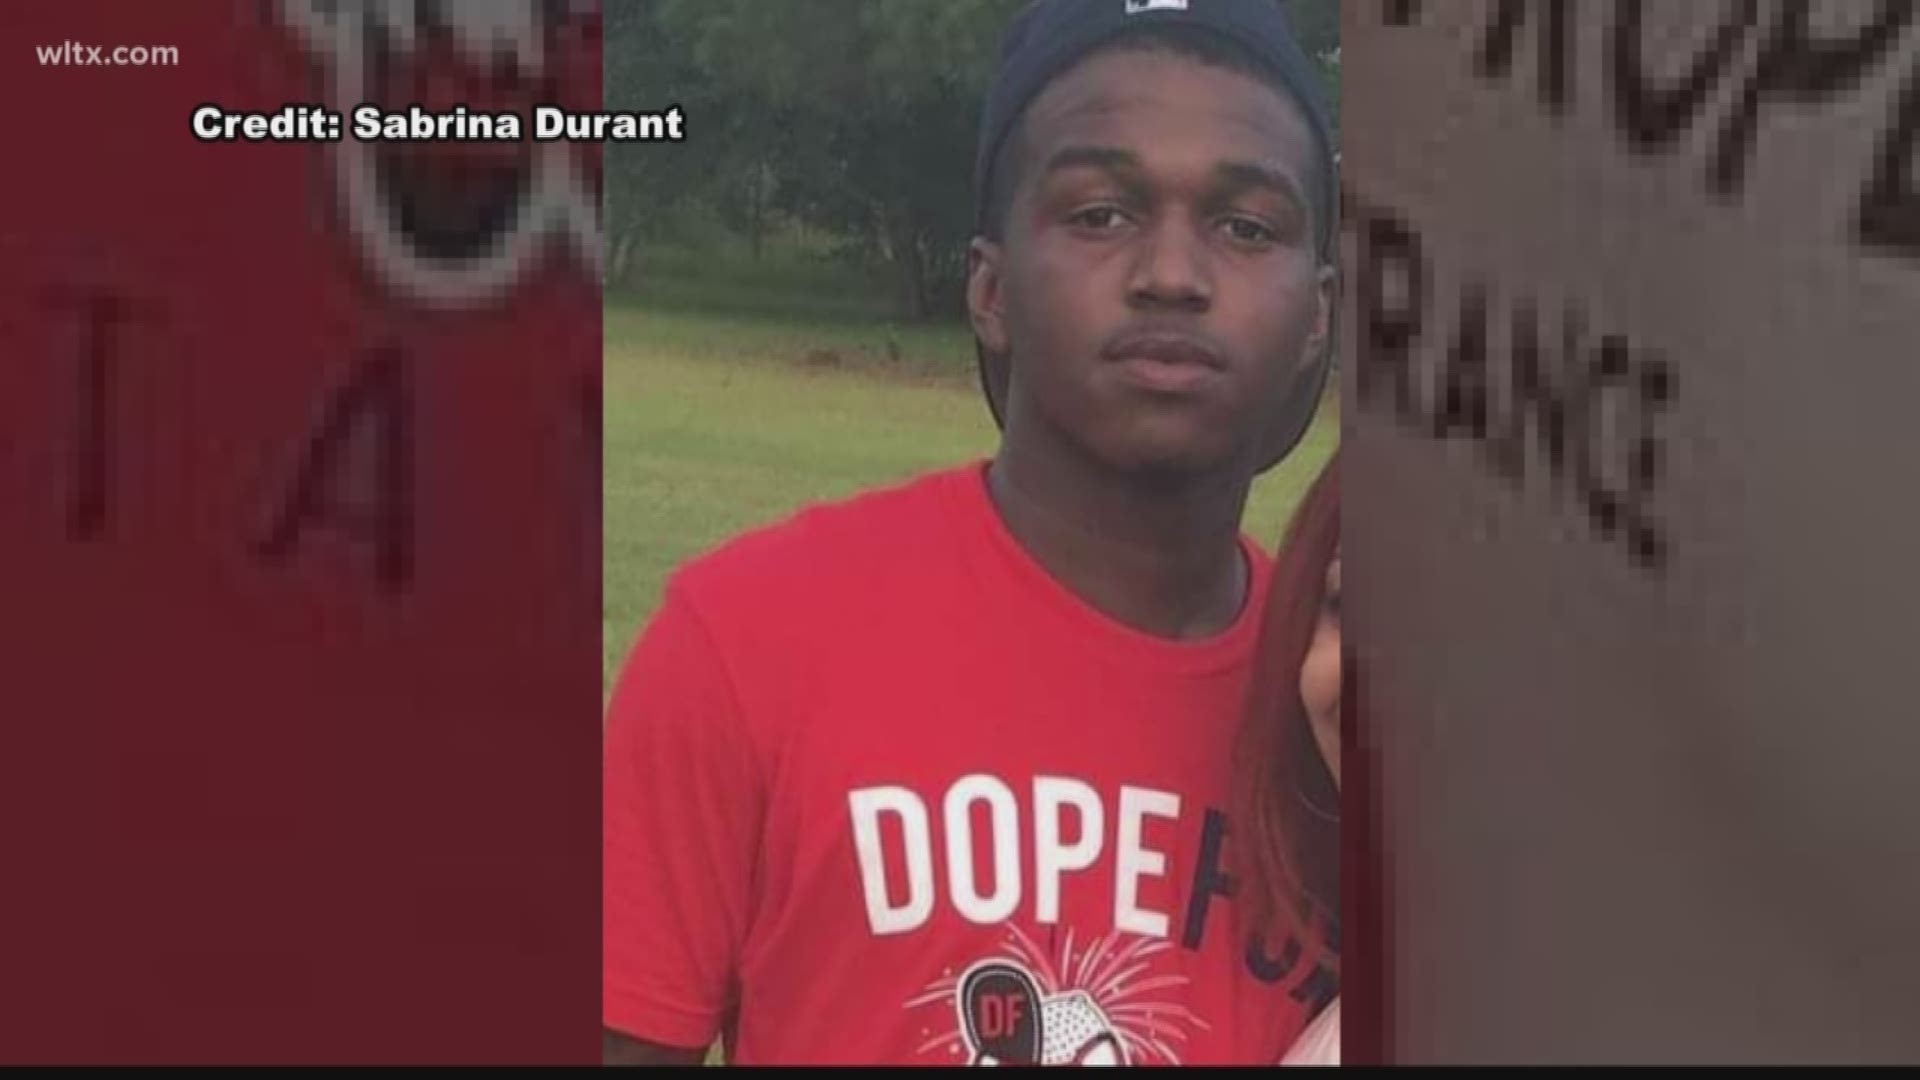 The outpouring of support for Evan Gaines, a USC Upstate student who was killed, continues to grow nearly a week after his death from a gunshot wound.